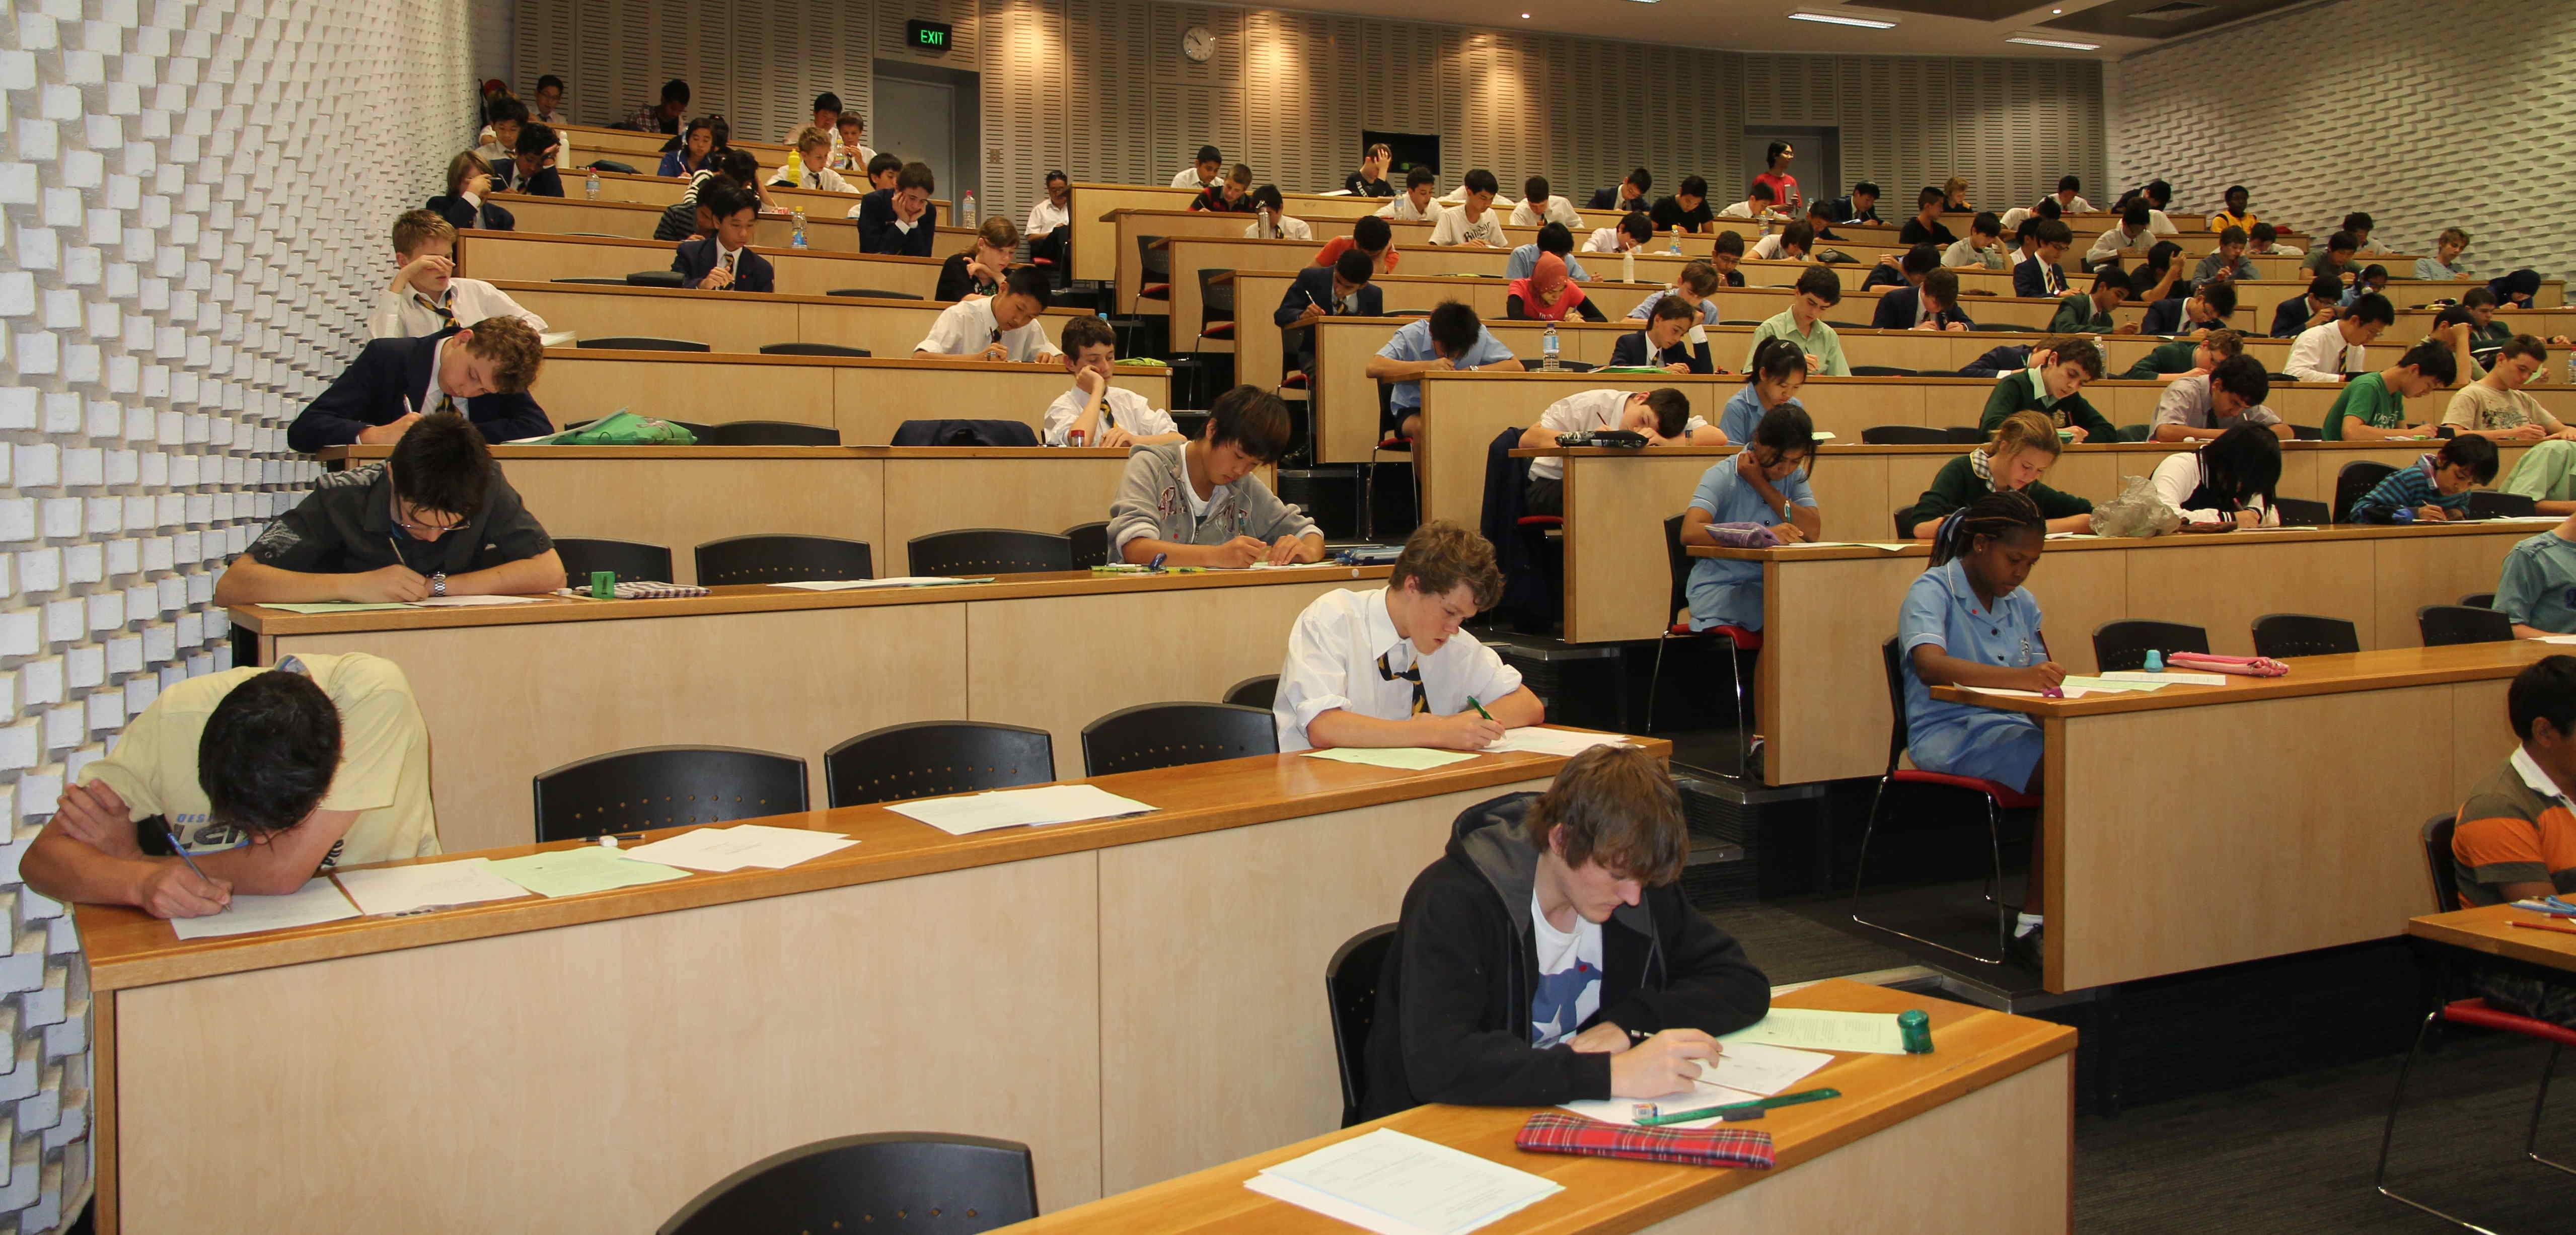 WAJO 2011: Individual Competition in Alexander Lecture Theatre